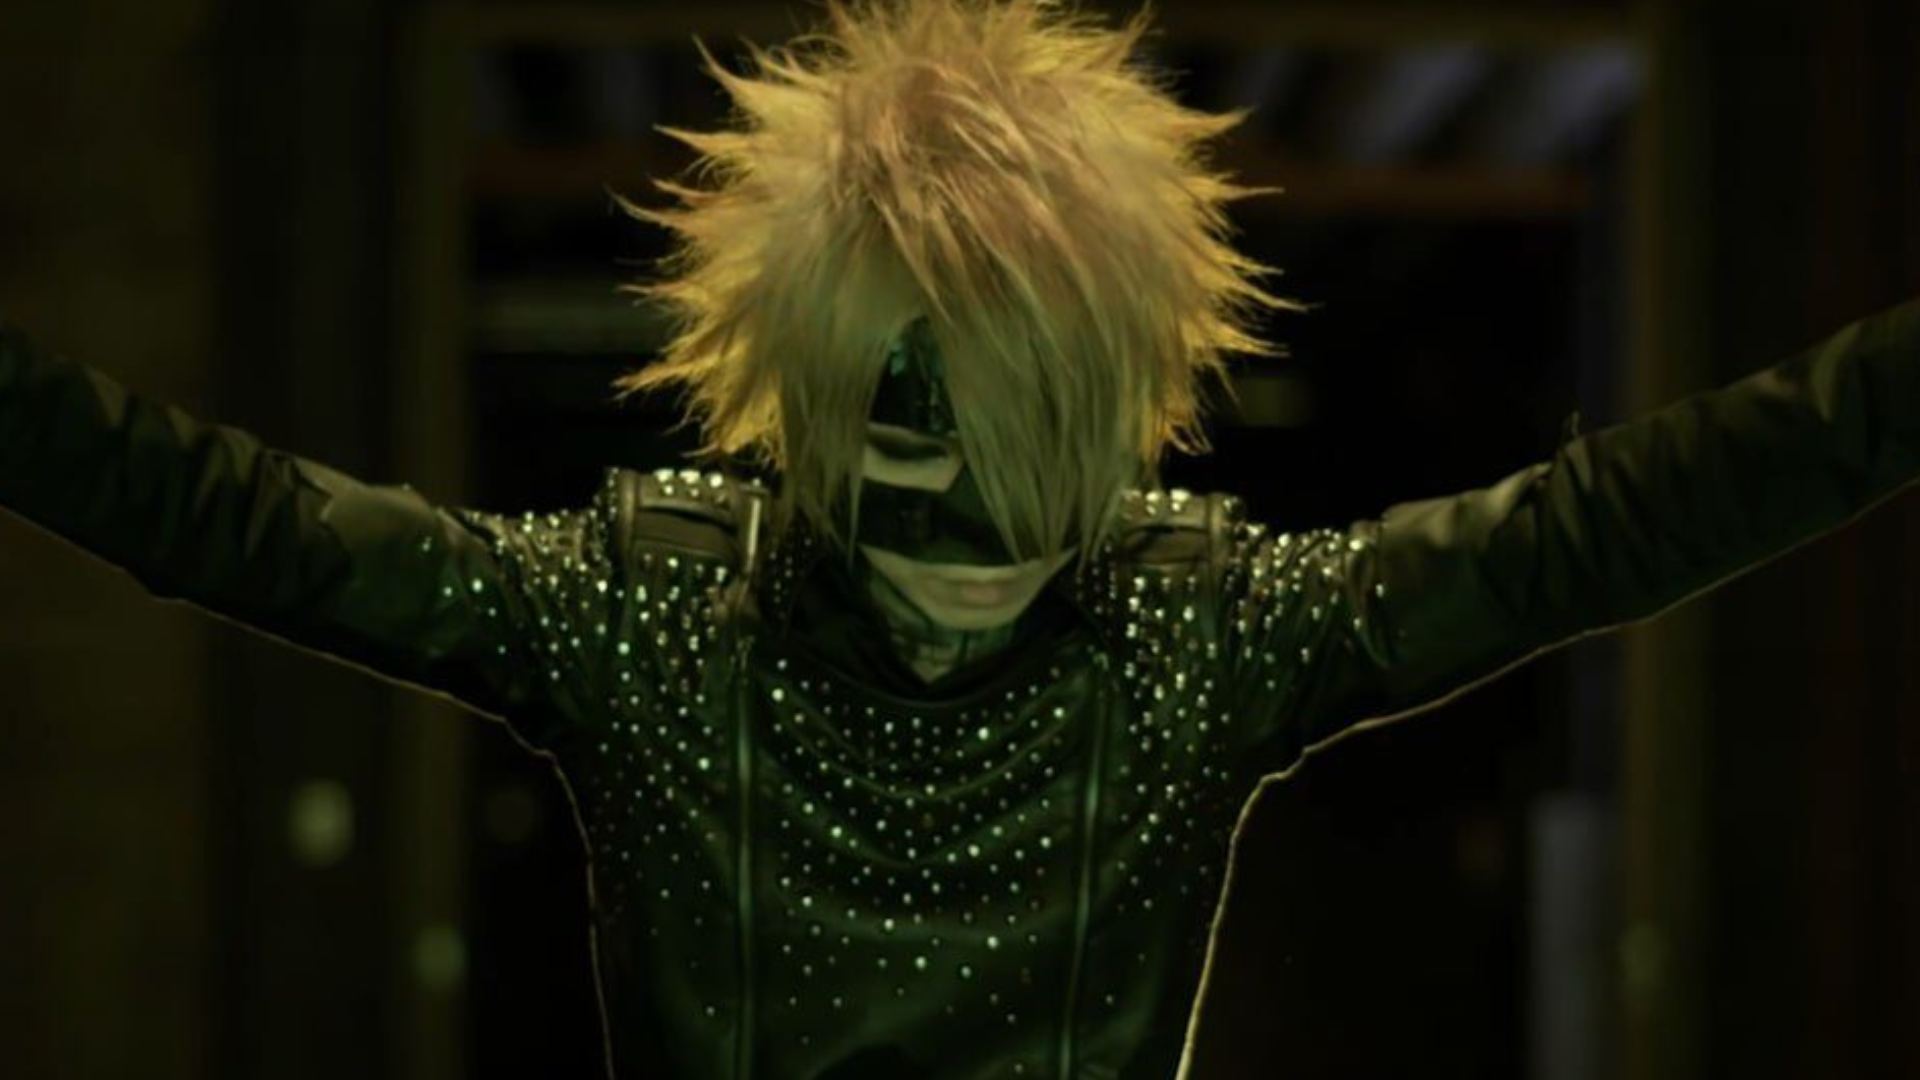 <p>According to Bass Magazine, Reita learned the bass in middle school. He had wanted to master the guitar but gave up and picked the bass because he thought it would be an easier instrument to play.</p> <p>Image: Sony Music</p>